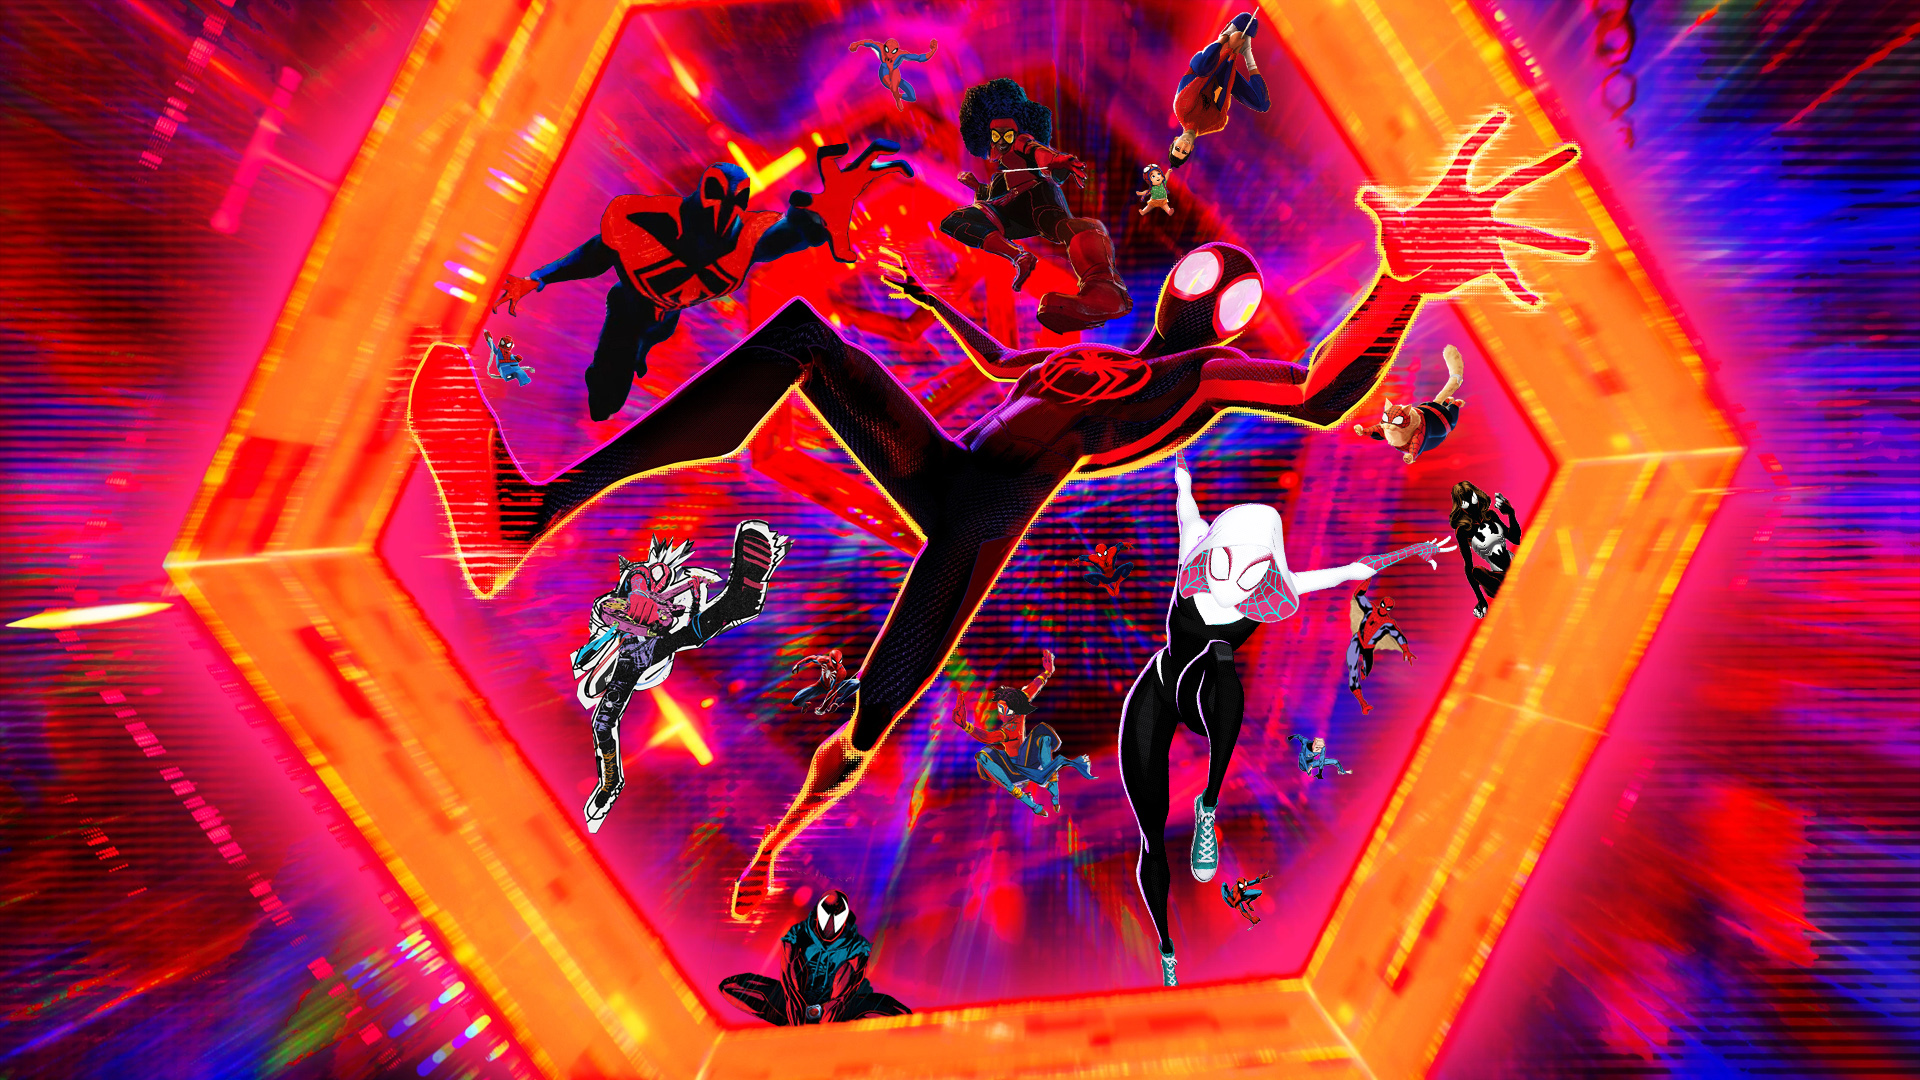 Spider-man: Across the Spider-Verse Wallpaper by Thekingblader995